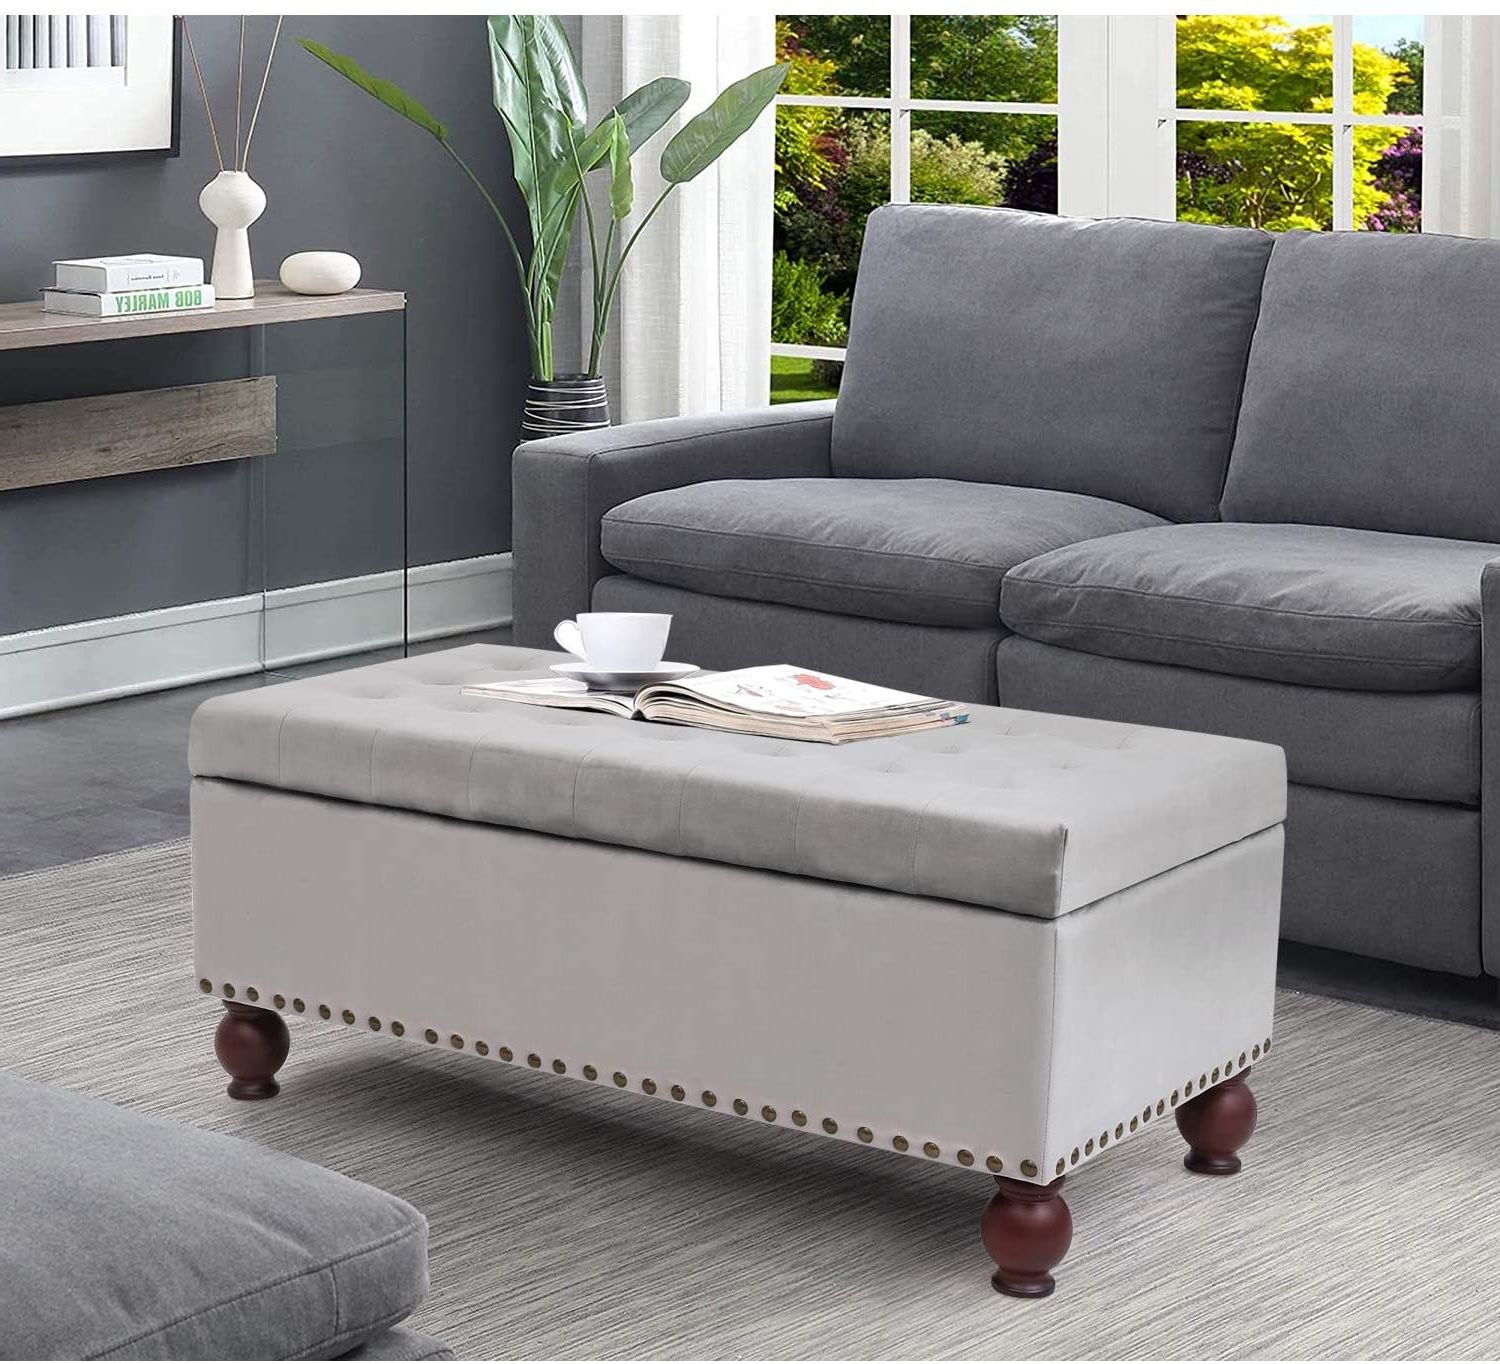 Preferred Rivet Gray Velvet Fabric Bench Within Homebeez 40" Storage Bench Ottoman Footstool  Tufted Storage Ottoman (View 10 of 10)